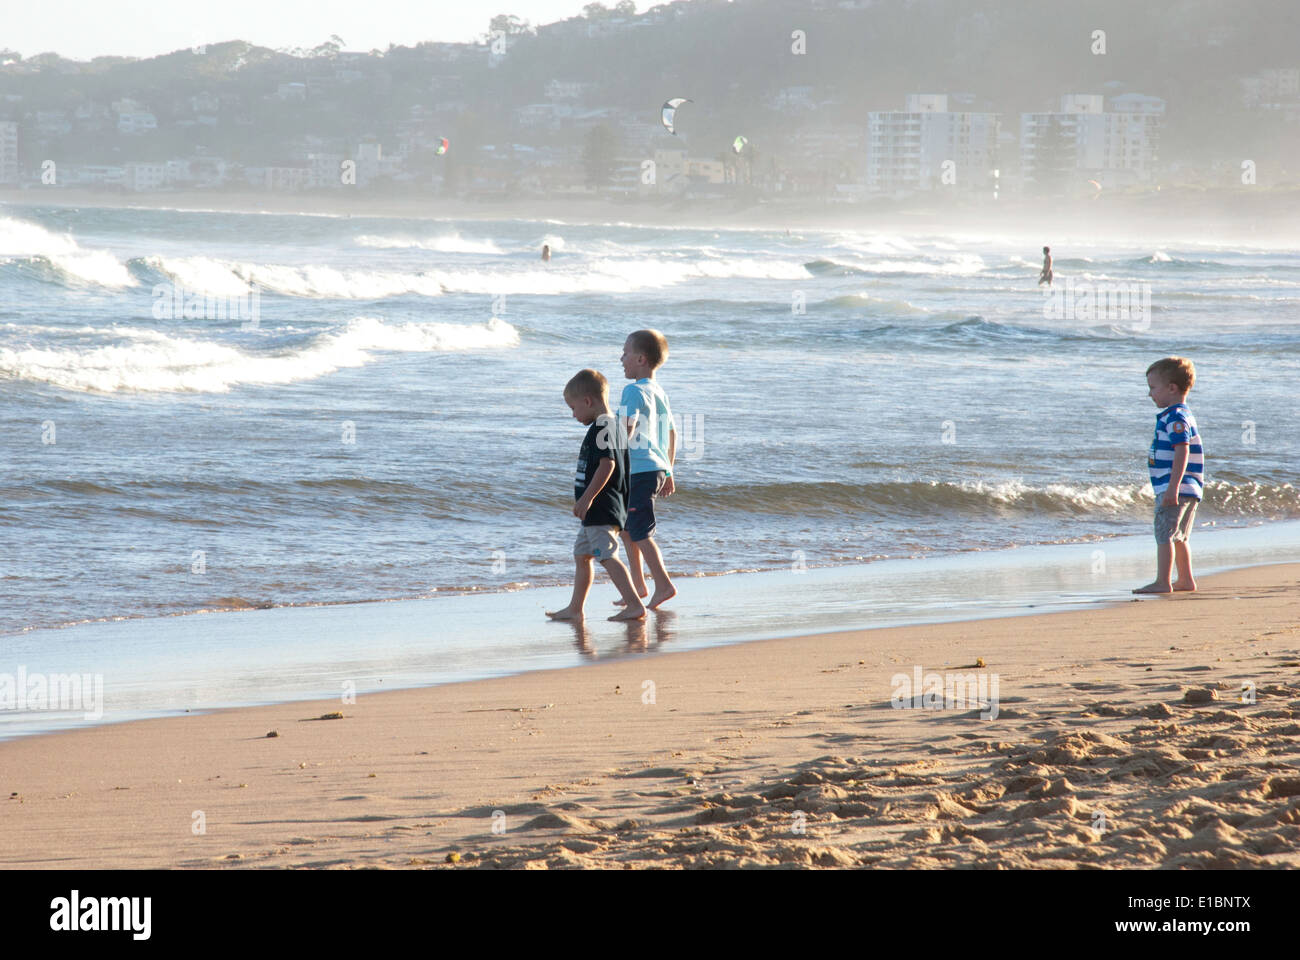 Three young boys playing at the shoreline on North Narrabeen beach. Stock Photo